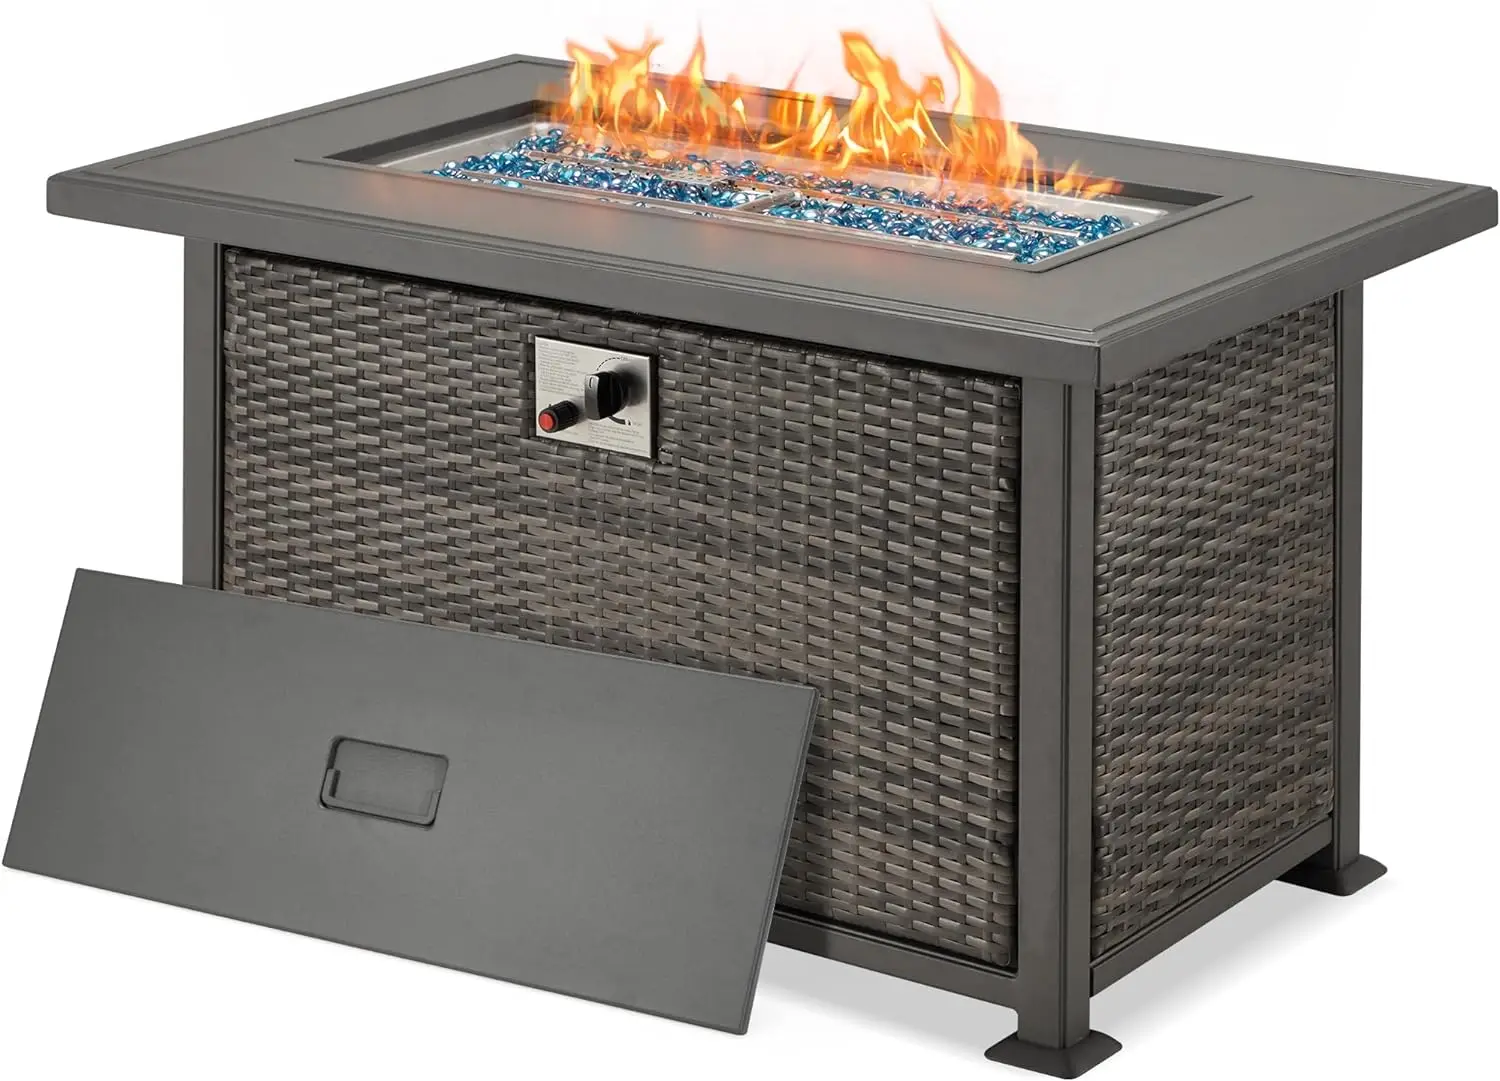 44" L Propane Fire Pit Table,50,000 BTU Auto-Ignition Gas Fire Table with CSA Certification,2 Hidden Side Hooks